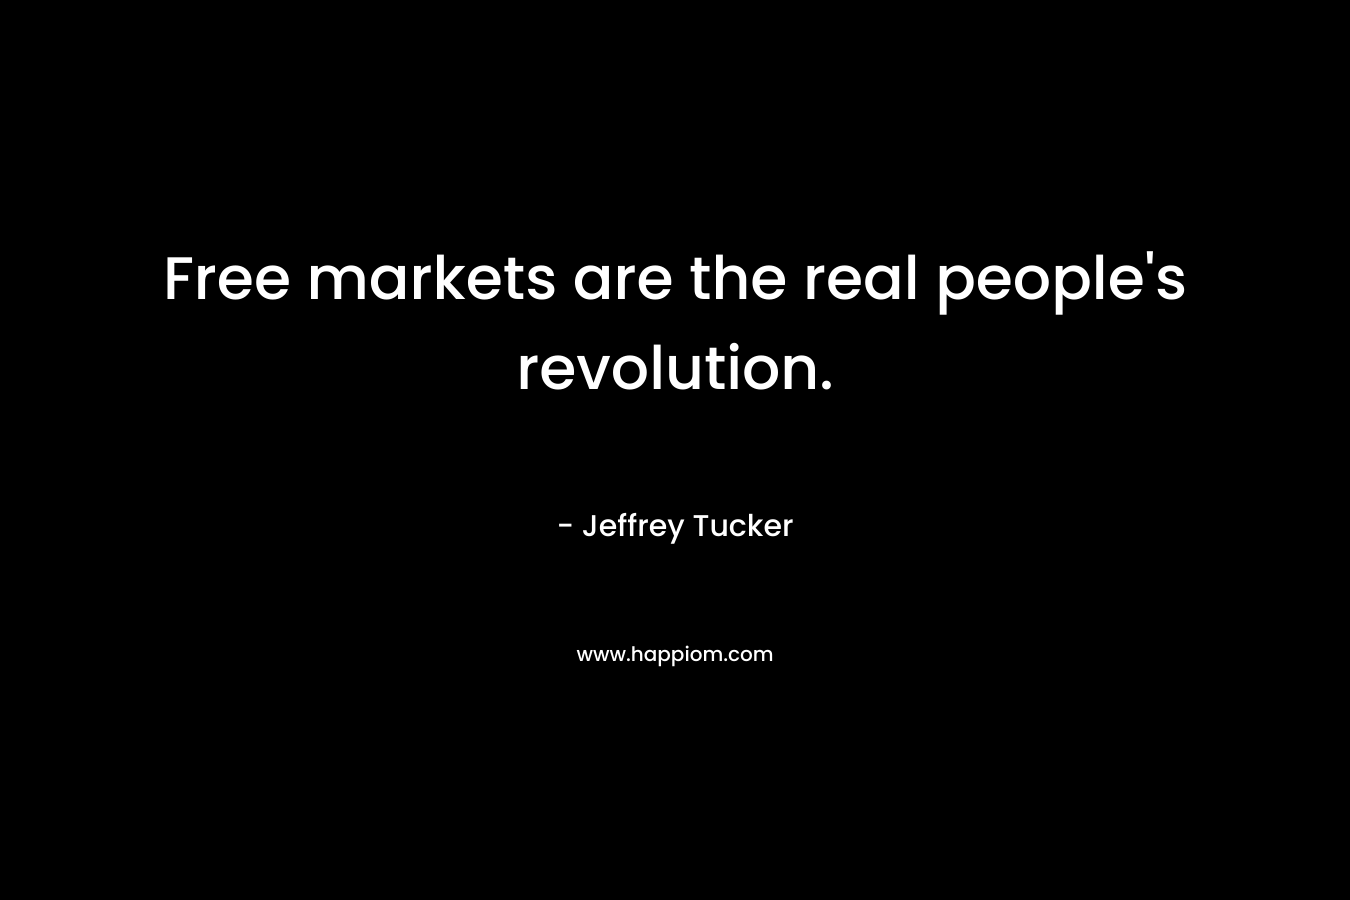 Free markets are the real people's revolution.